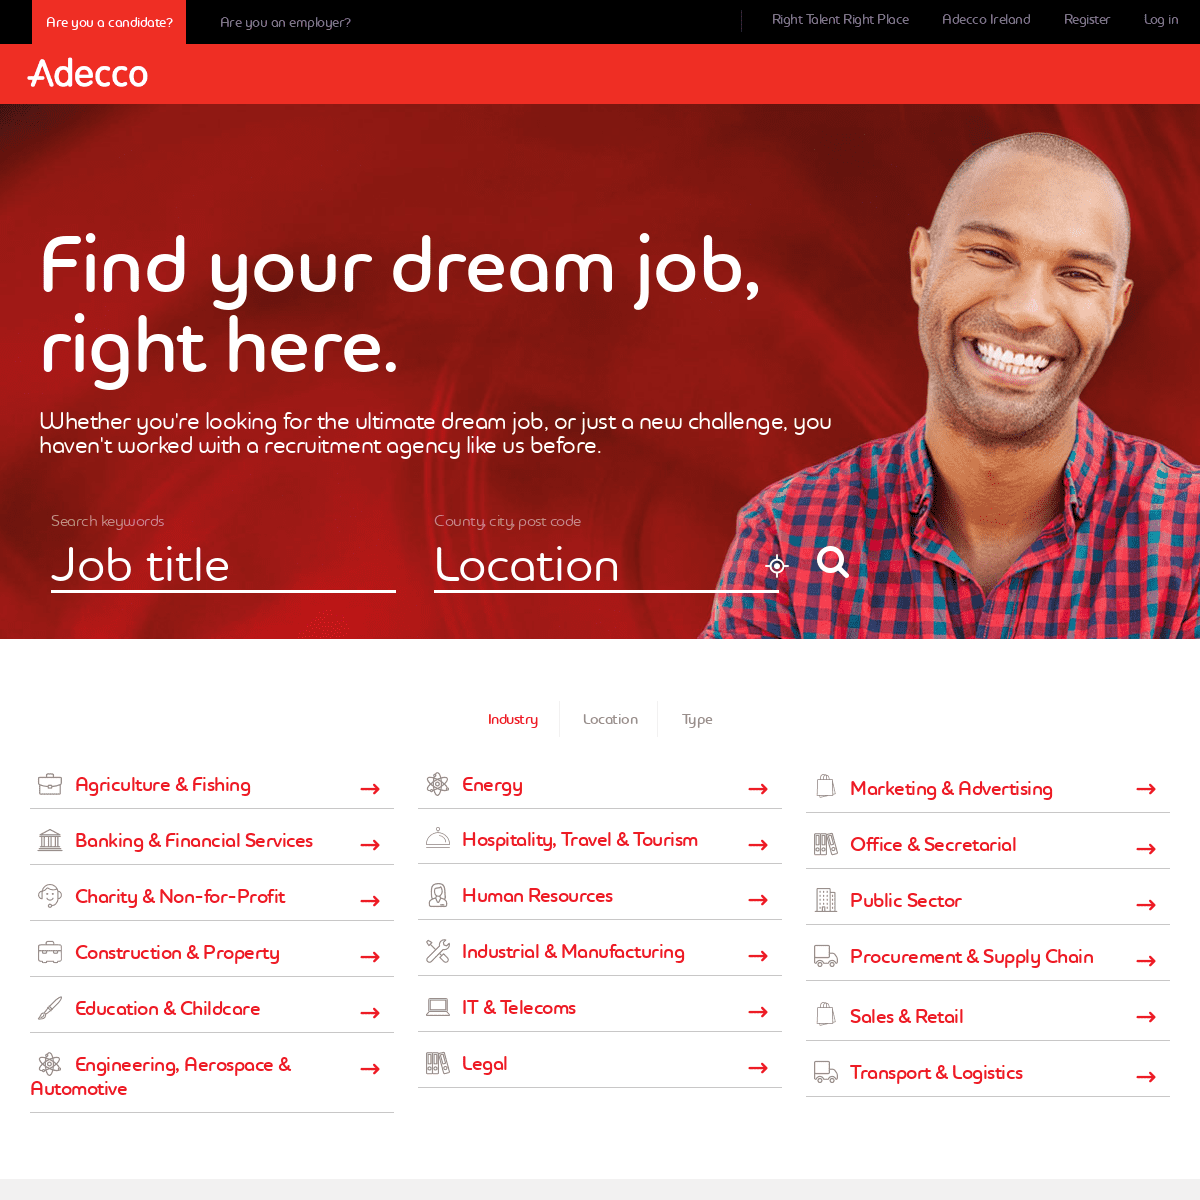 A complete backup of adecco.co.uk